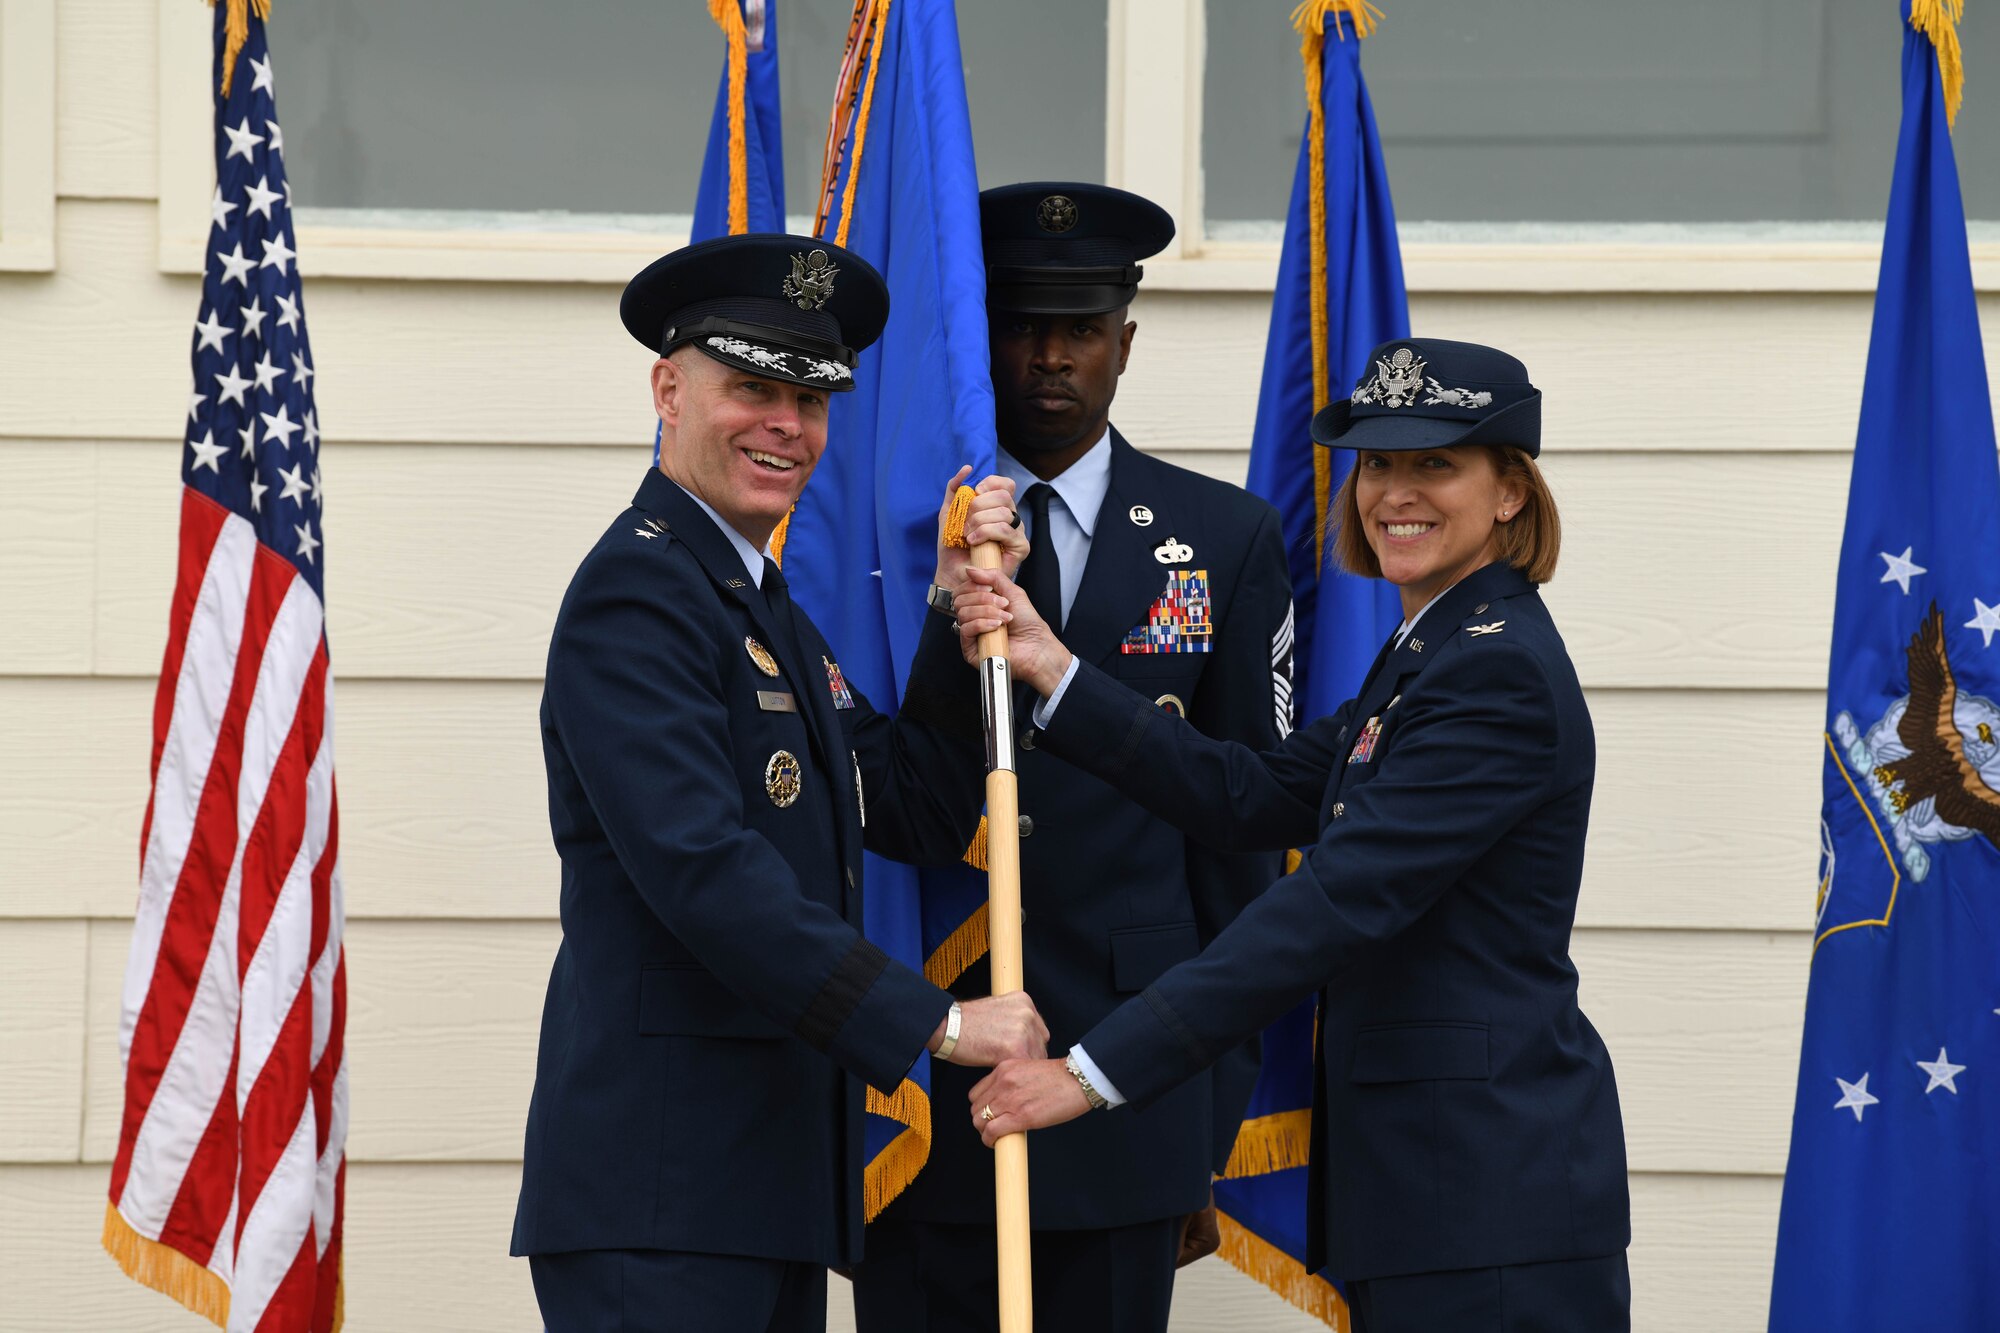 Maj. Gen. Michael Lutton, 20th Air Force commander, passes the guidon to Col. Catherine Barrington, 90th Missile Wing commander, during the 90 MW change of command ceremony June 28, 2021, F.E. Warren Air Force Base, Wyoming. The ceremony signified the transition of command from Col. Peter Bonetti to Col. Catherine Barrington. (U.S. Air Force photo by Airman 1st Class Anthony Munoz)